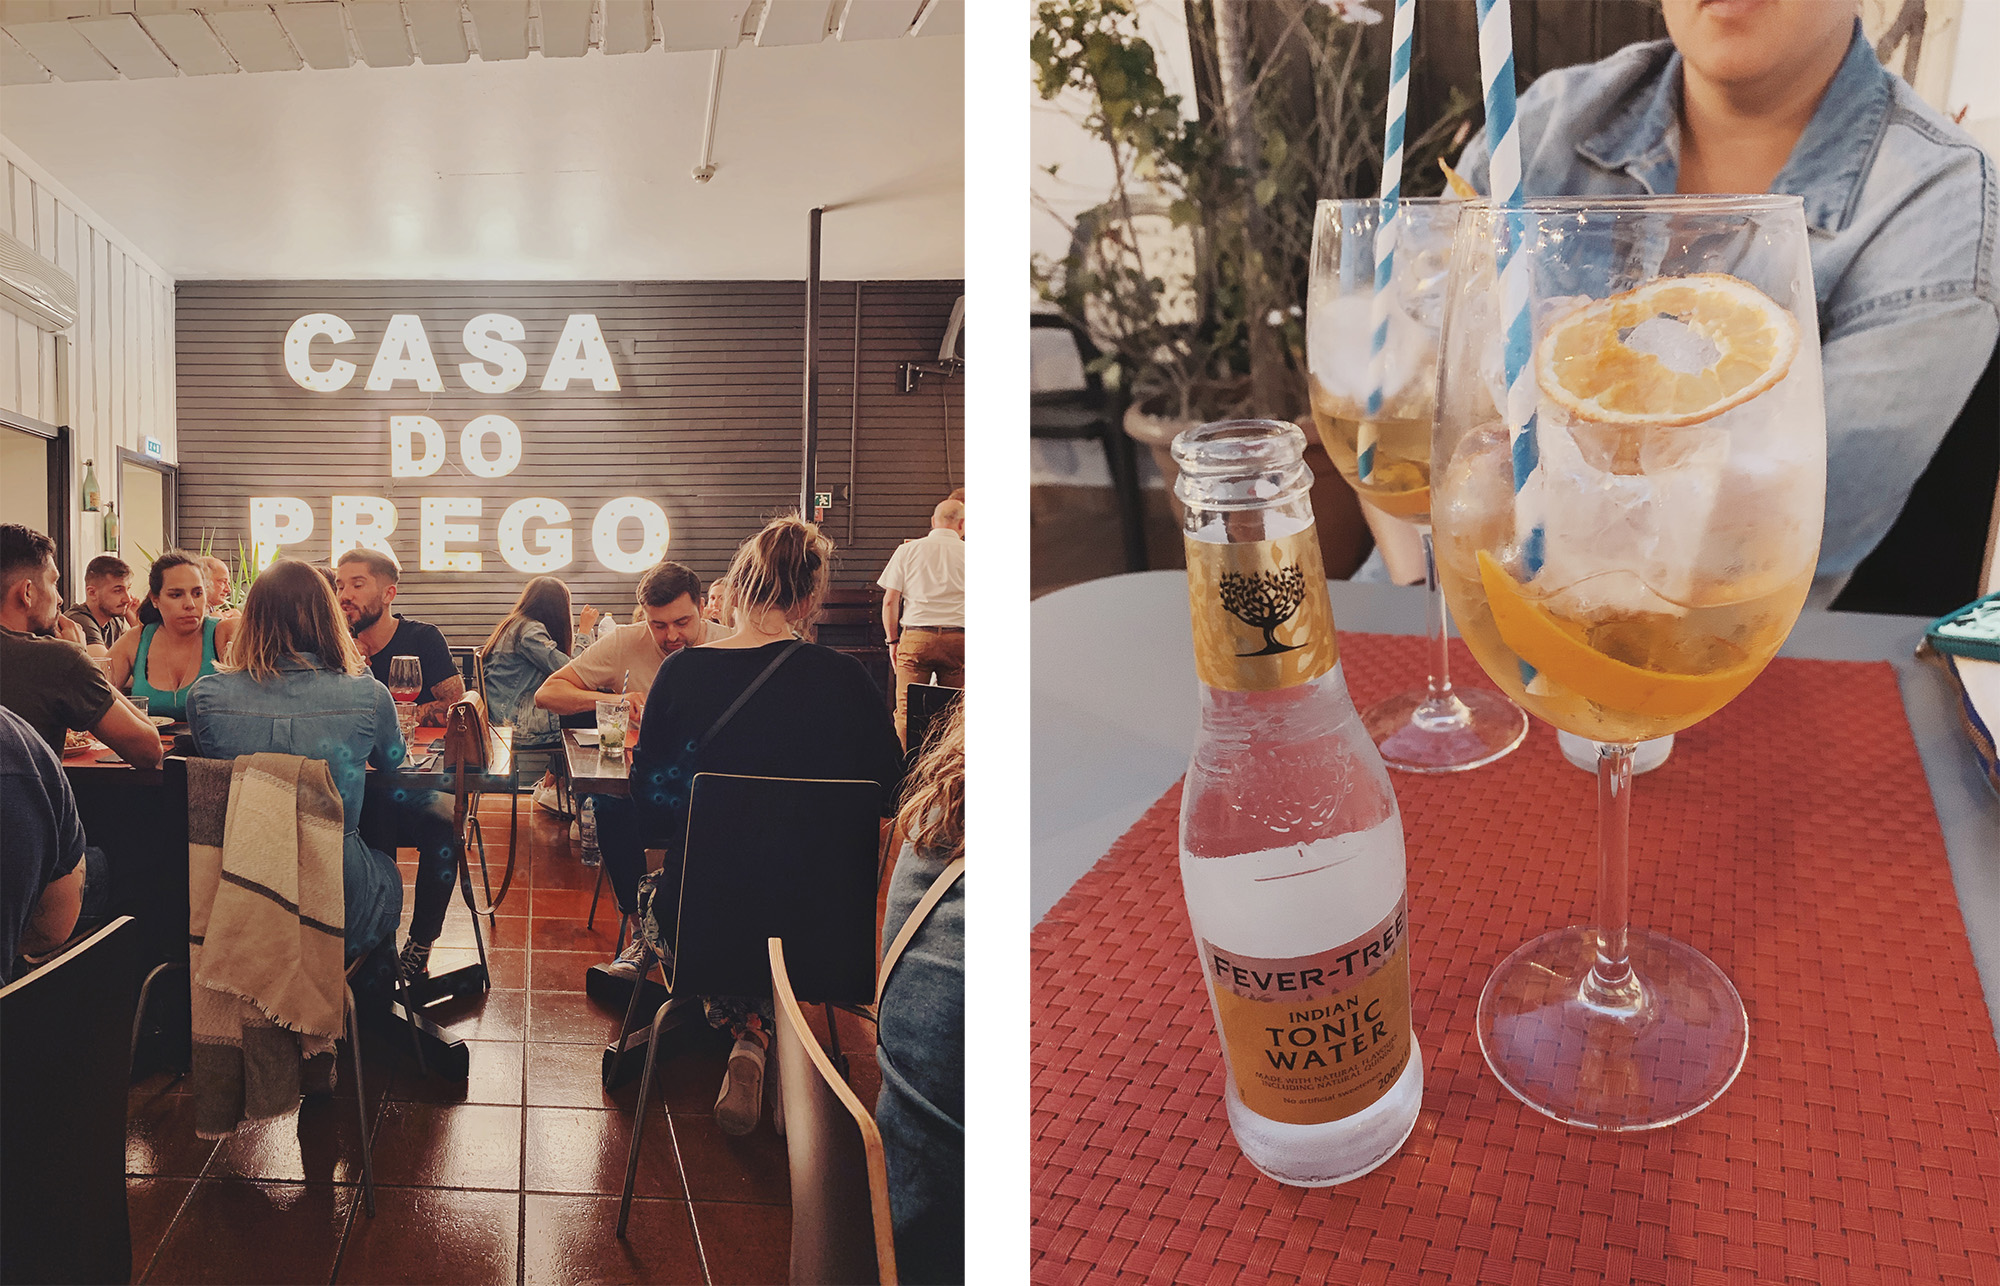 Lagos is a gorgeous coastal town in Portugal's Algarve region known for some of the country's most glorious beaches. Here's a guide to everything you need to know!